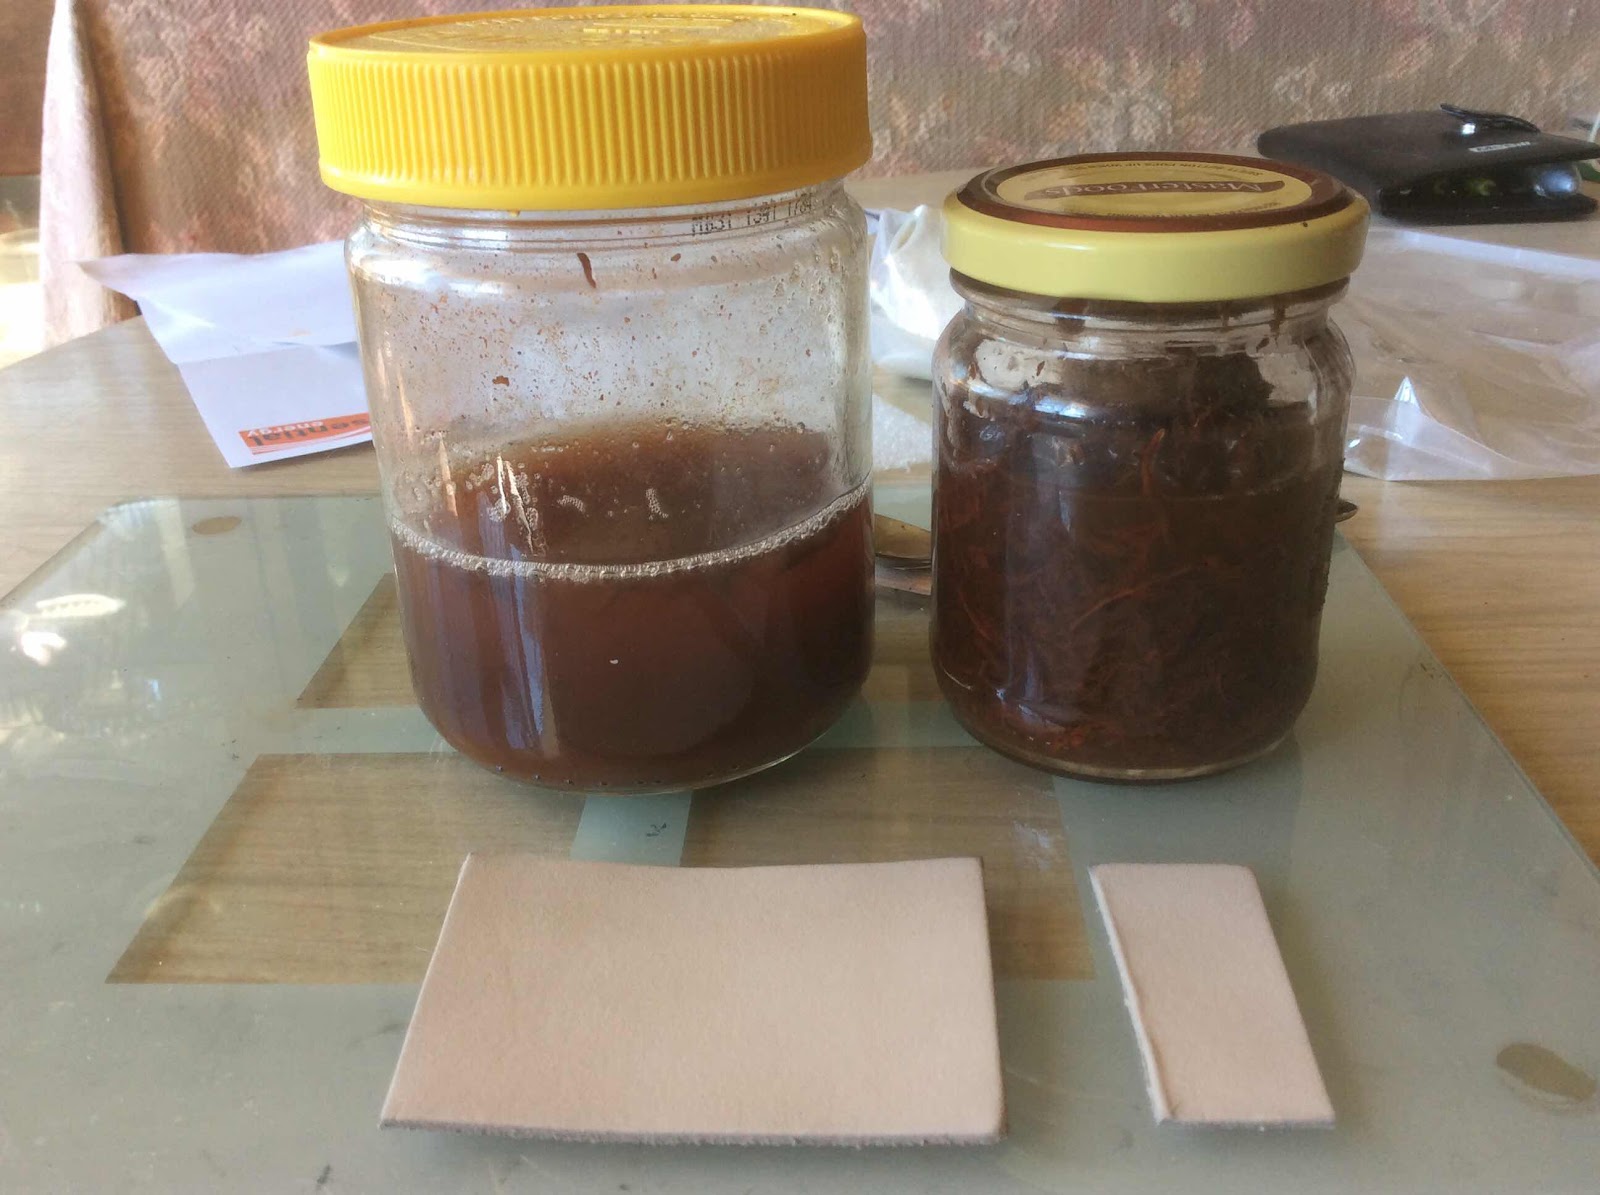 Left: 1st generation dye; right: madder roots and water - 2nd generation